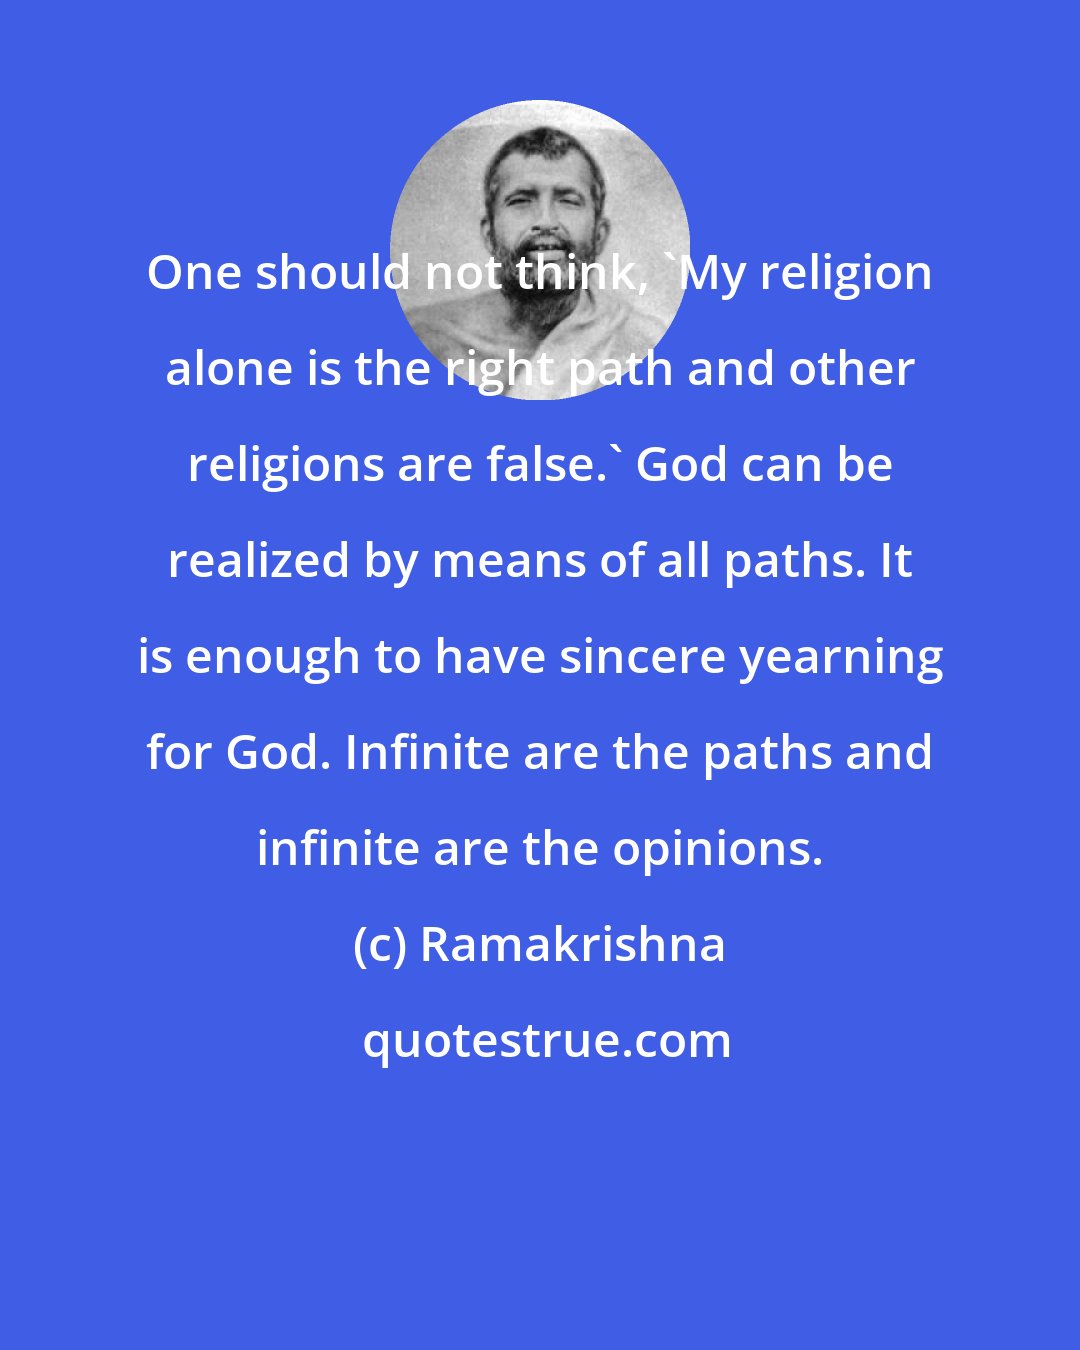 Ramakrishna: One should not think, 'My religion alone is the right path and other religions are false.' God can be realized by means of all paths. It is enough to have sincere yearning for God. Infinite are the paths and infinite are the opinions.